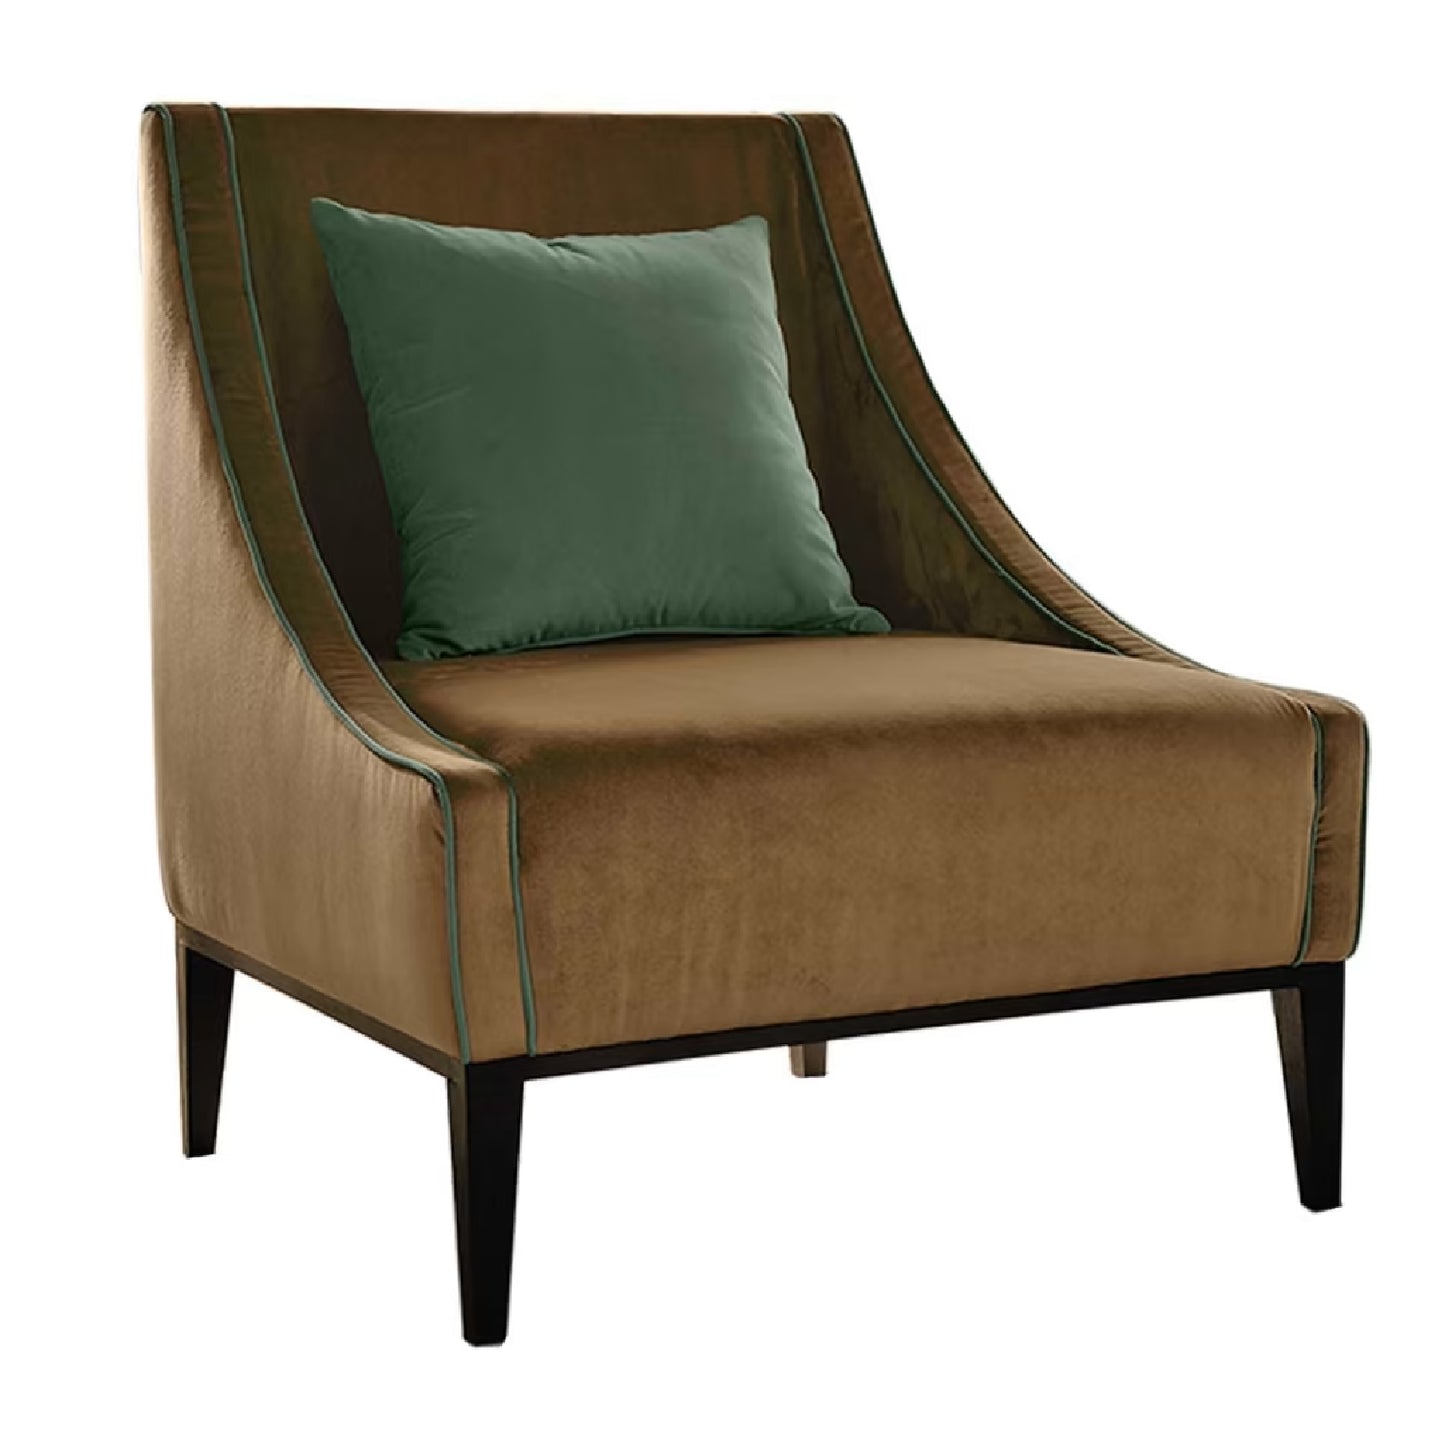 Sikka P61 Taupe Armchair by Domingo Salotti